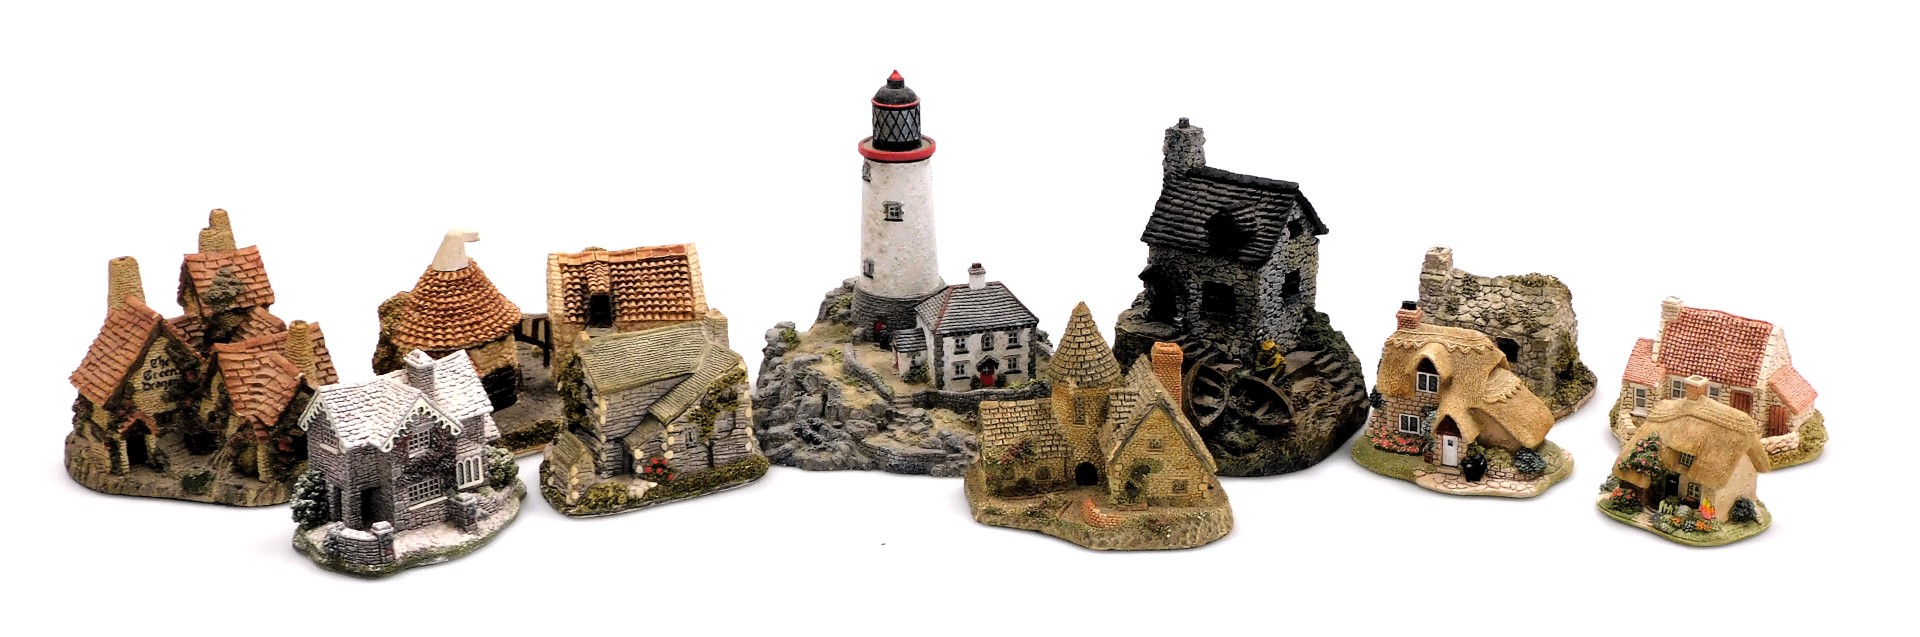 A group of Lilliput Lane and Danbury Mint sculptures, including Green Dragon Pub, The Vicarage, Appl